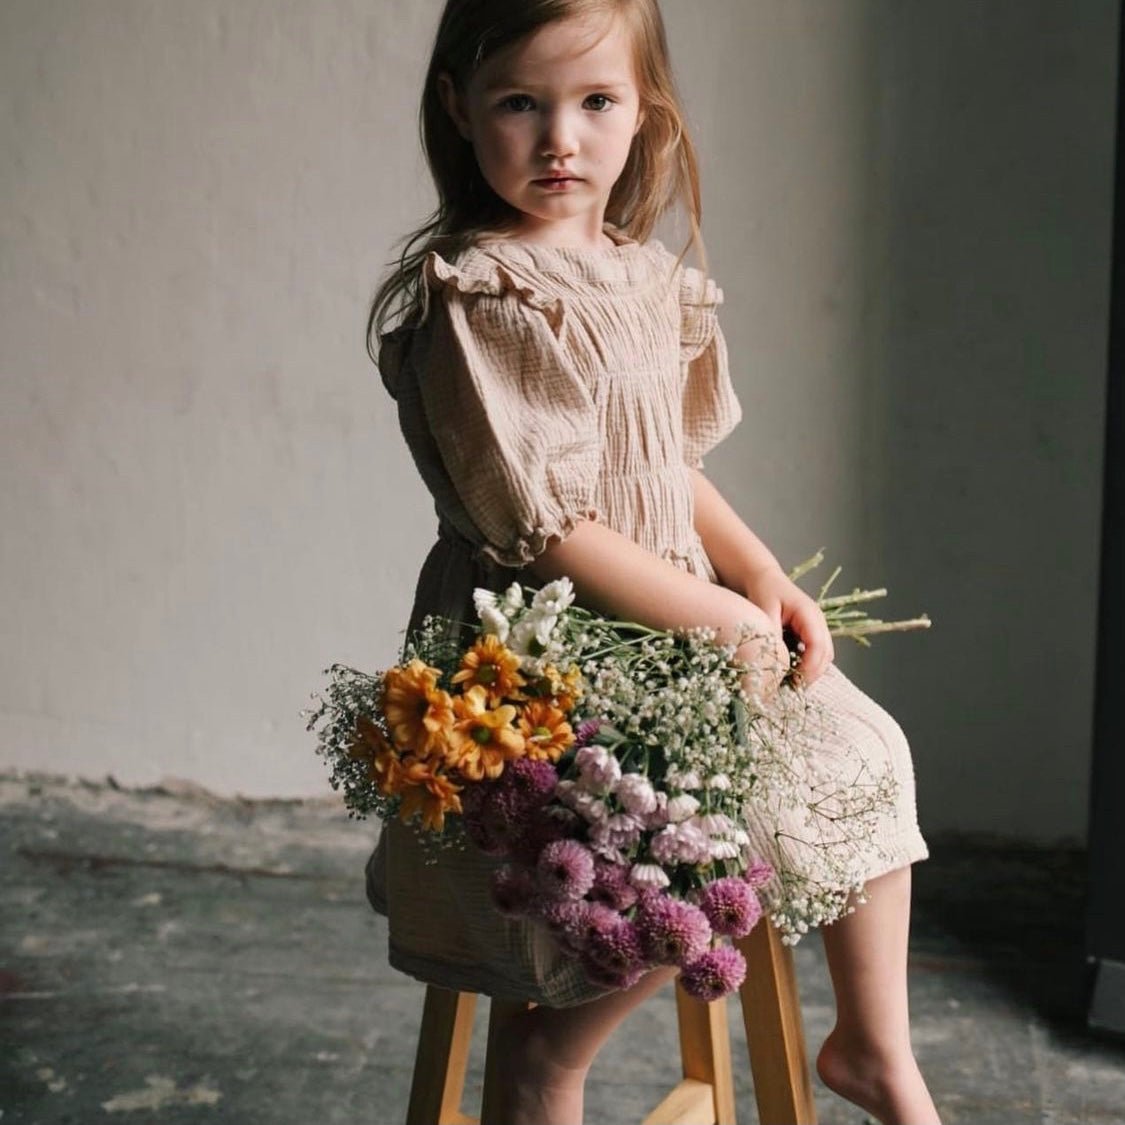 Mae Kleid Summer Sand find Stylish Fashion for Little People- at Little Foxx Concept Store